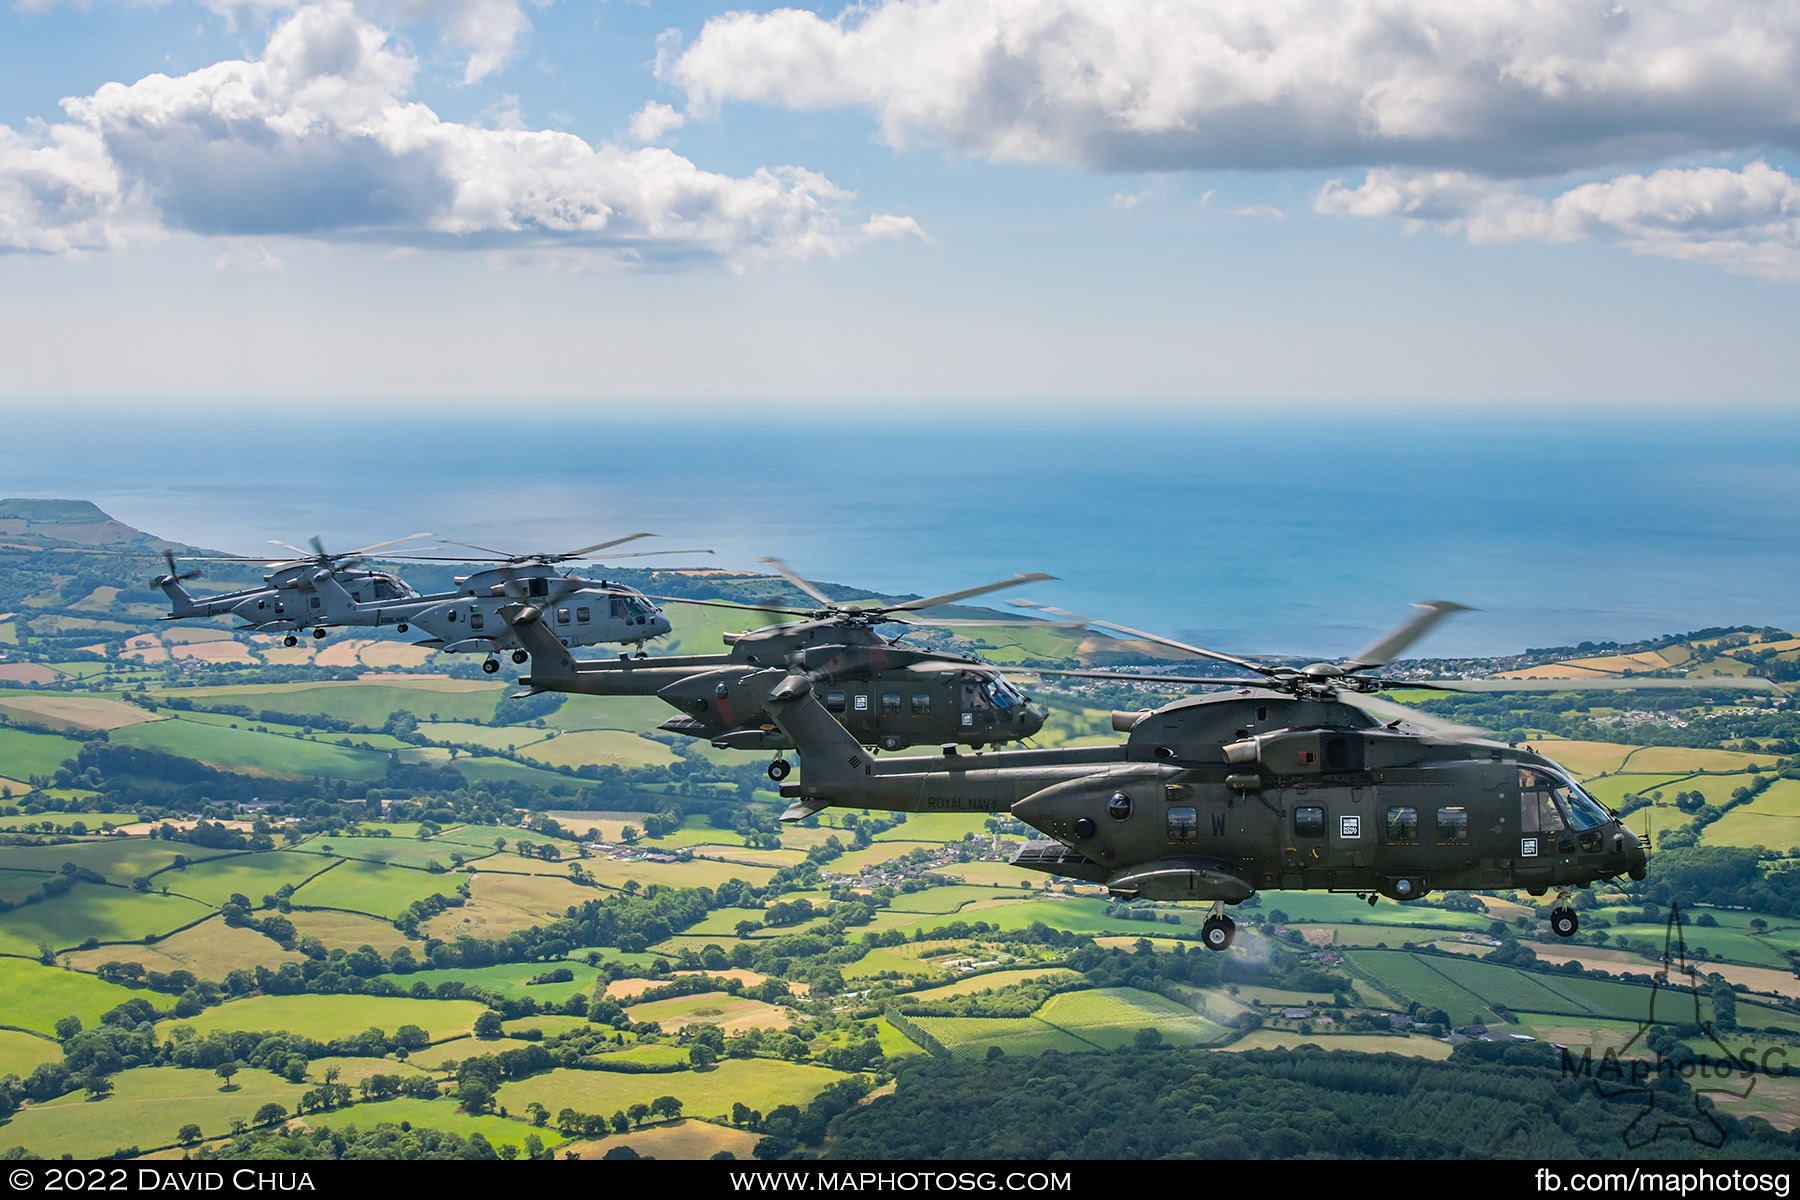 Formation of 4 Royal Navy Merlins